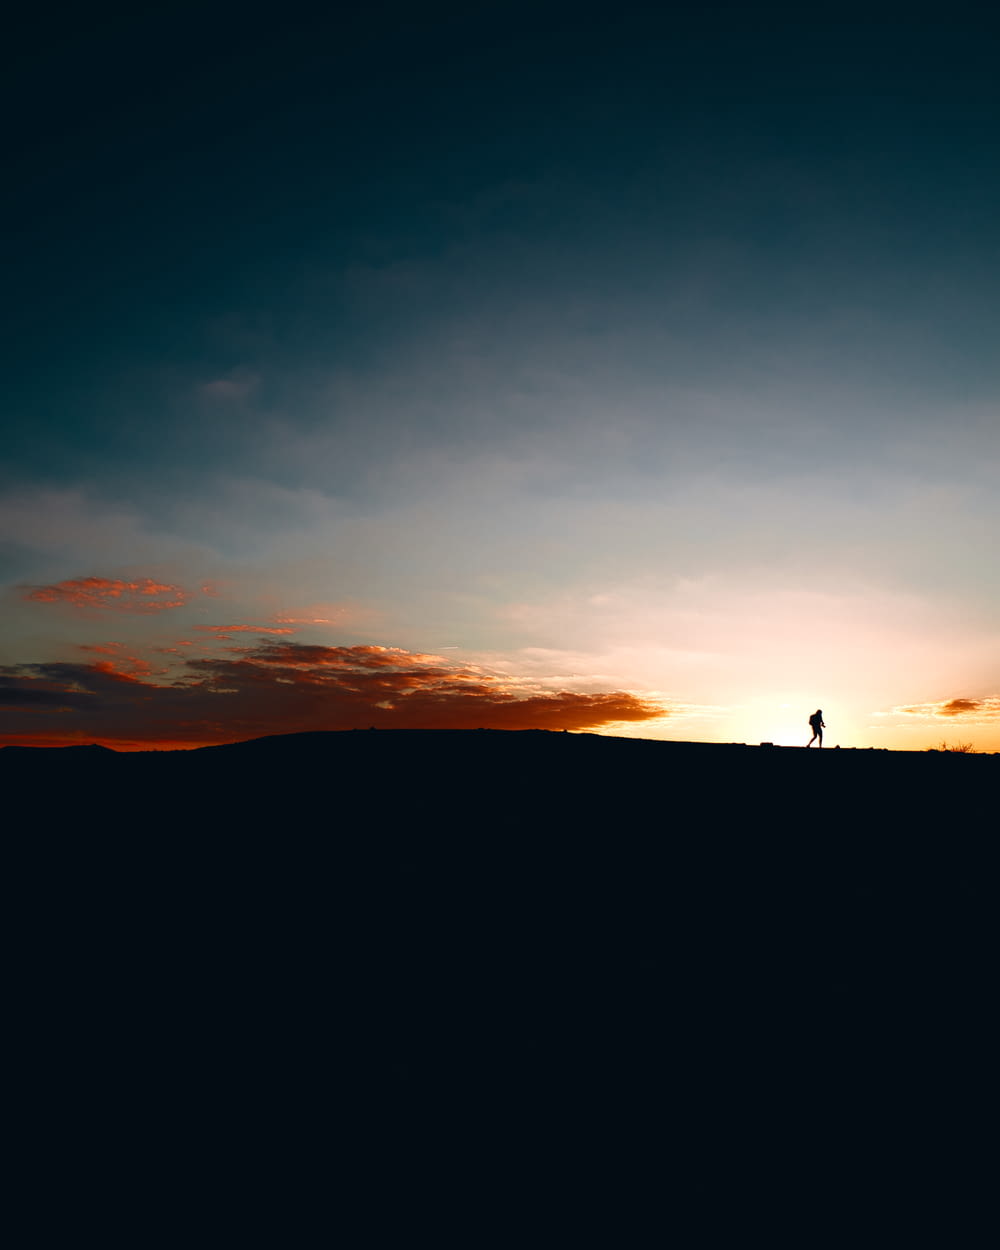 a person standing on top of a hill at sunset